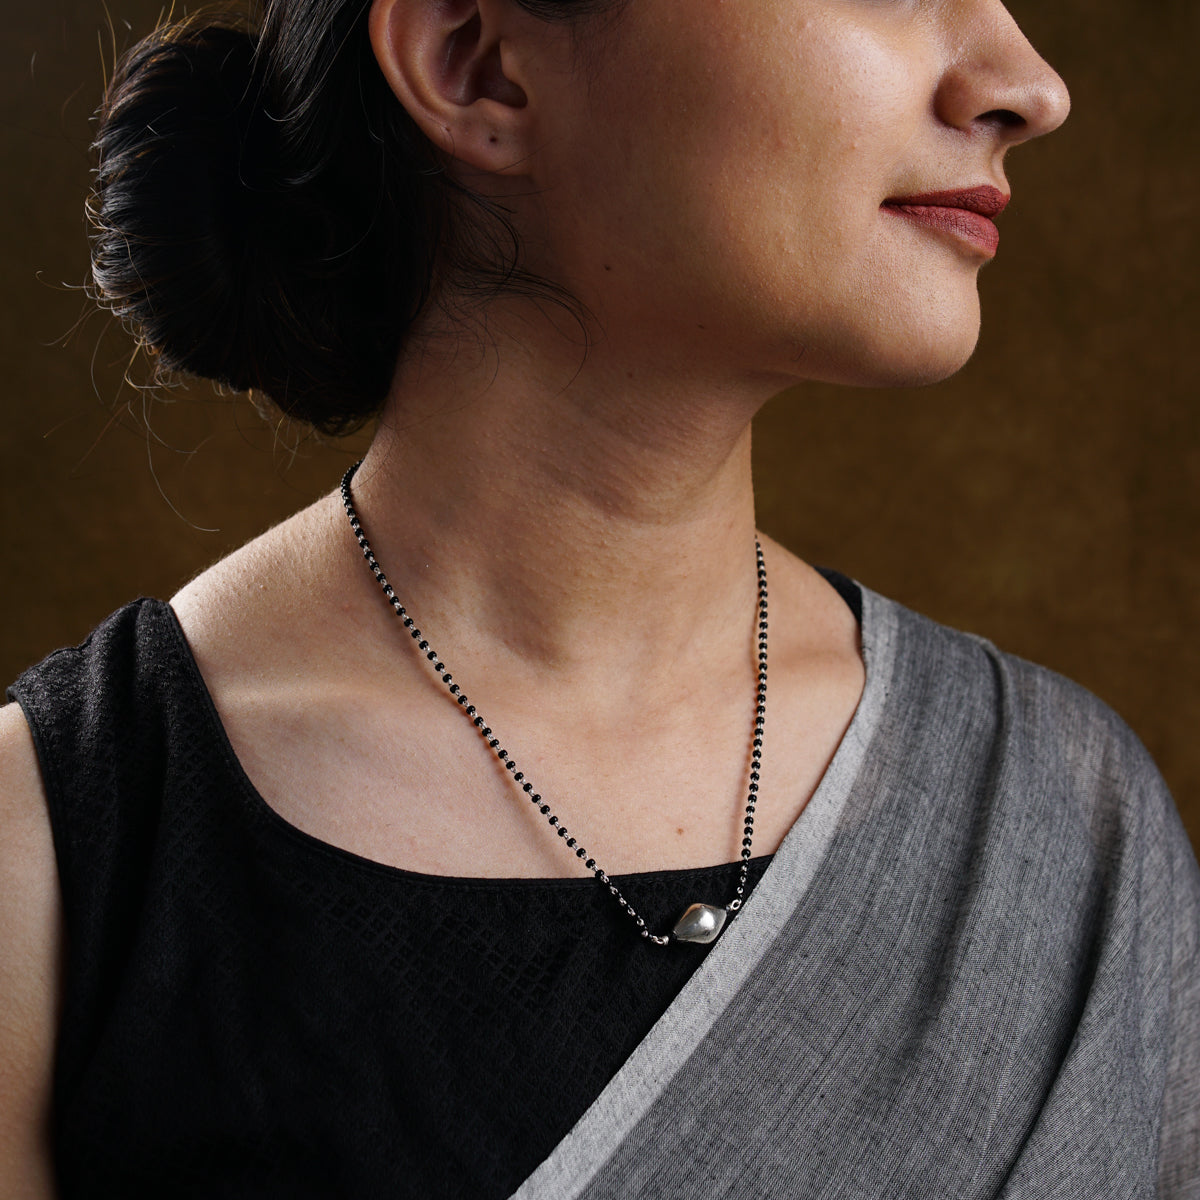 a woman wearing a black and silver necklace